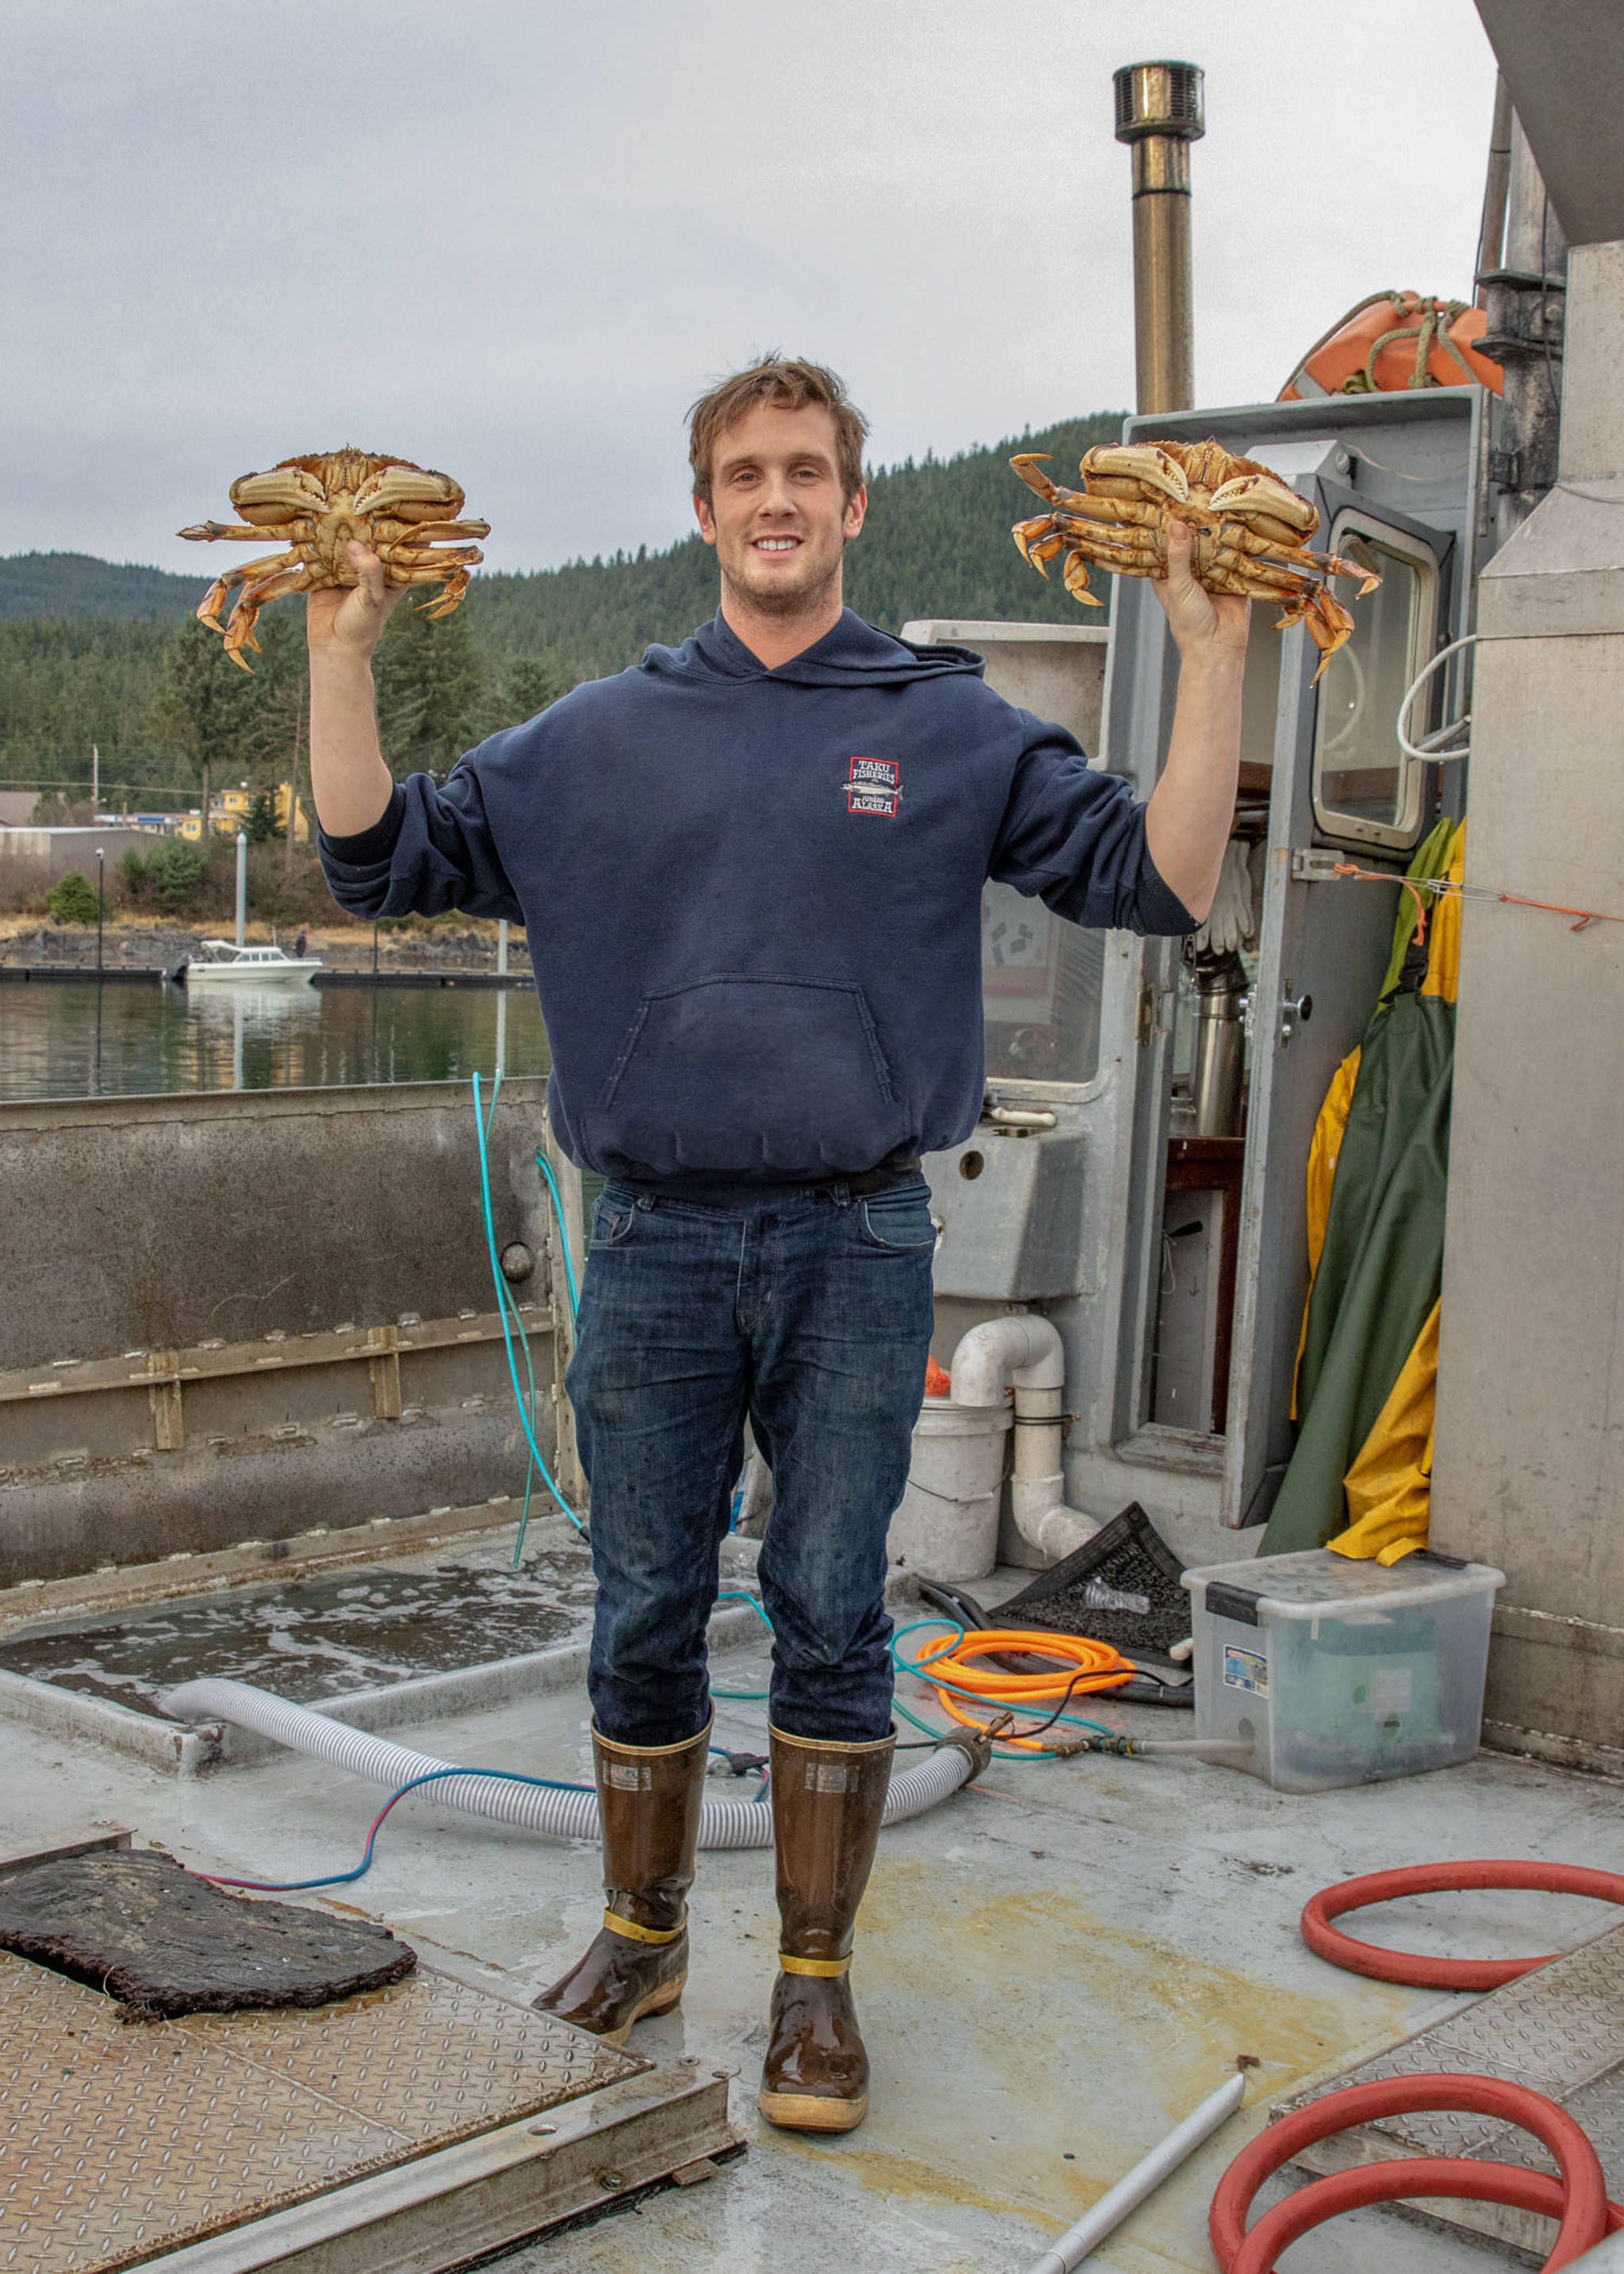 Nov. 25, 2018: Here’s a big “thanks” to all the working people in Juneau who help make our community a wonderful place to live. On this day, I ran into Eric Daugherty selling Dungeness crab off the F/V Americanus. Fishing is all about being practical, but I thought Eric also looked ruggedly handsome in his navy Taku Fisheries sweatshirt, jeans and Xtratufs.